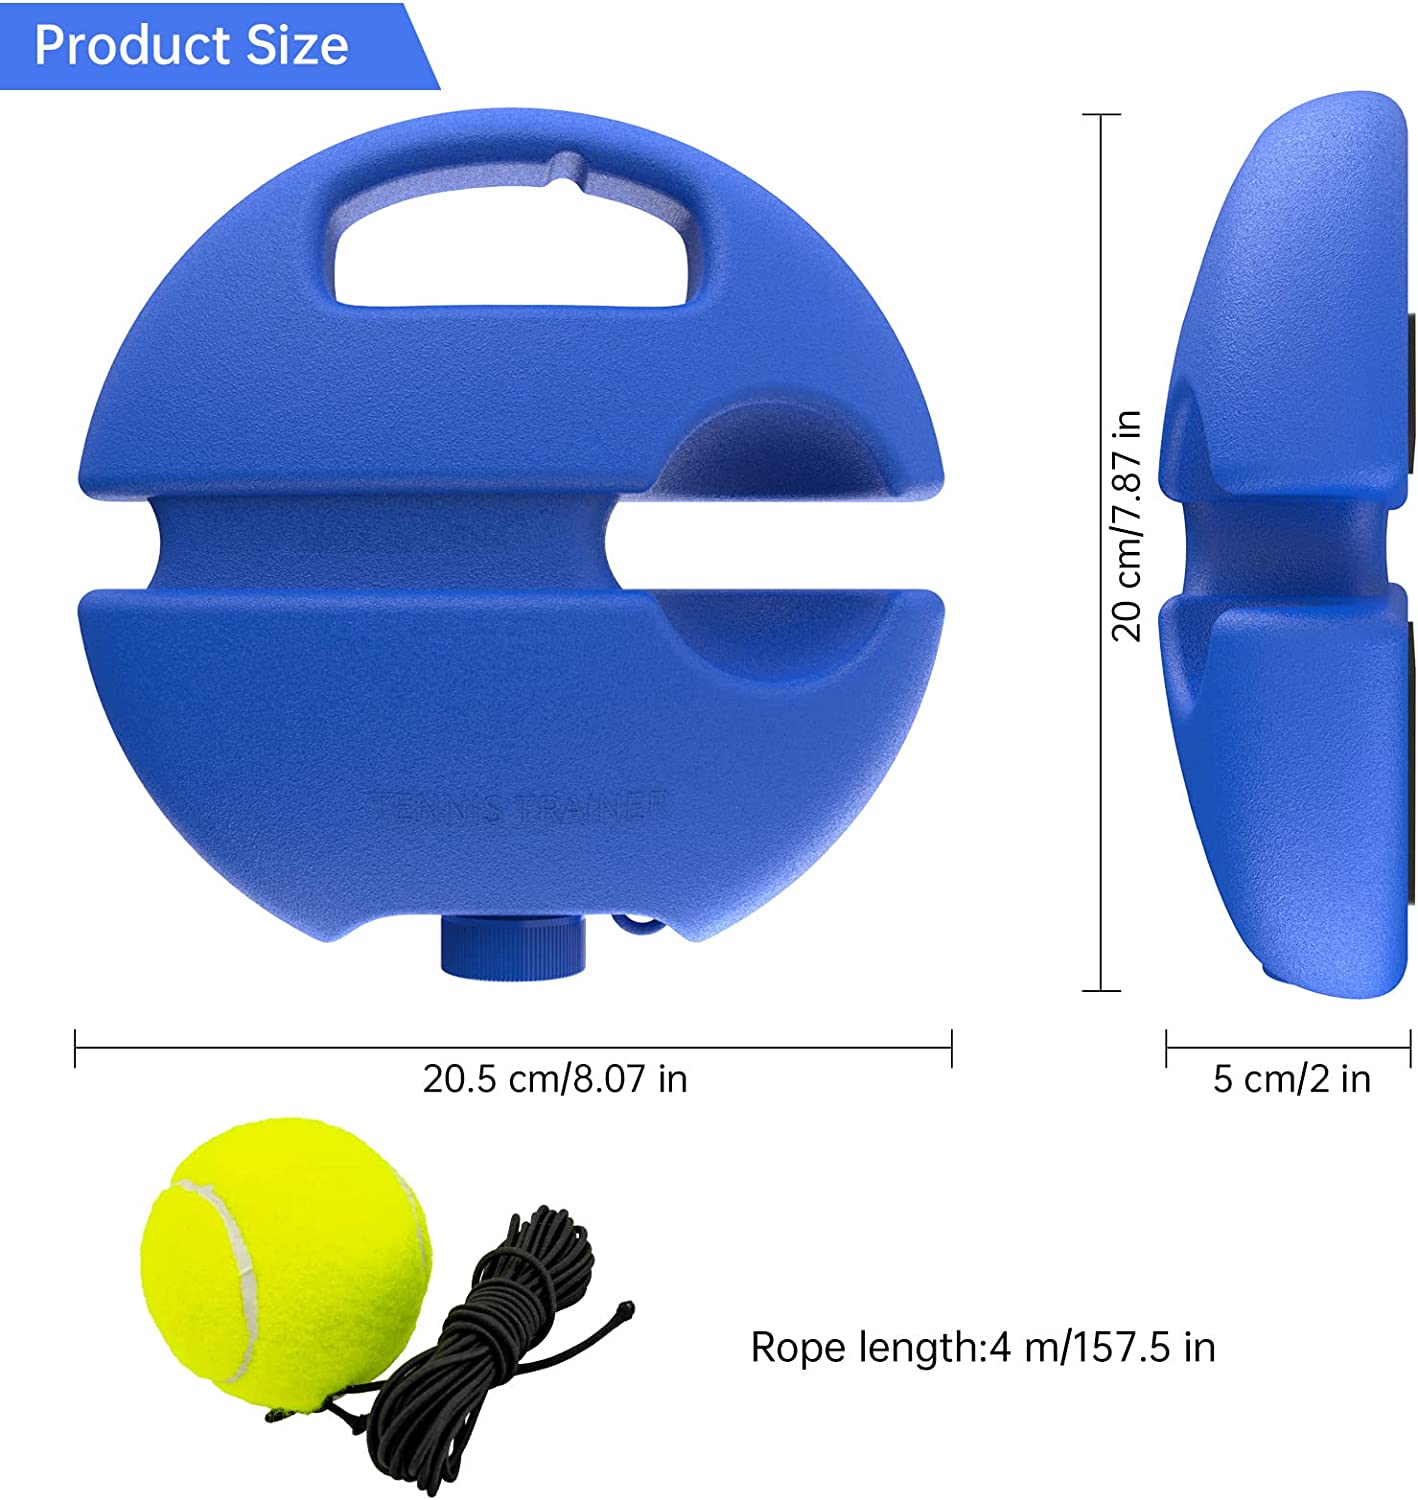 Portable Cricket and Tennis Tool